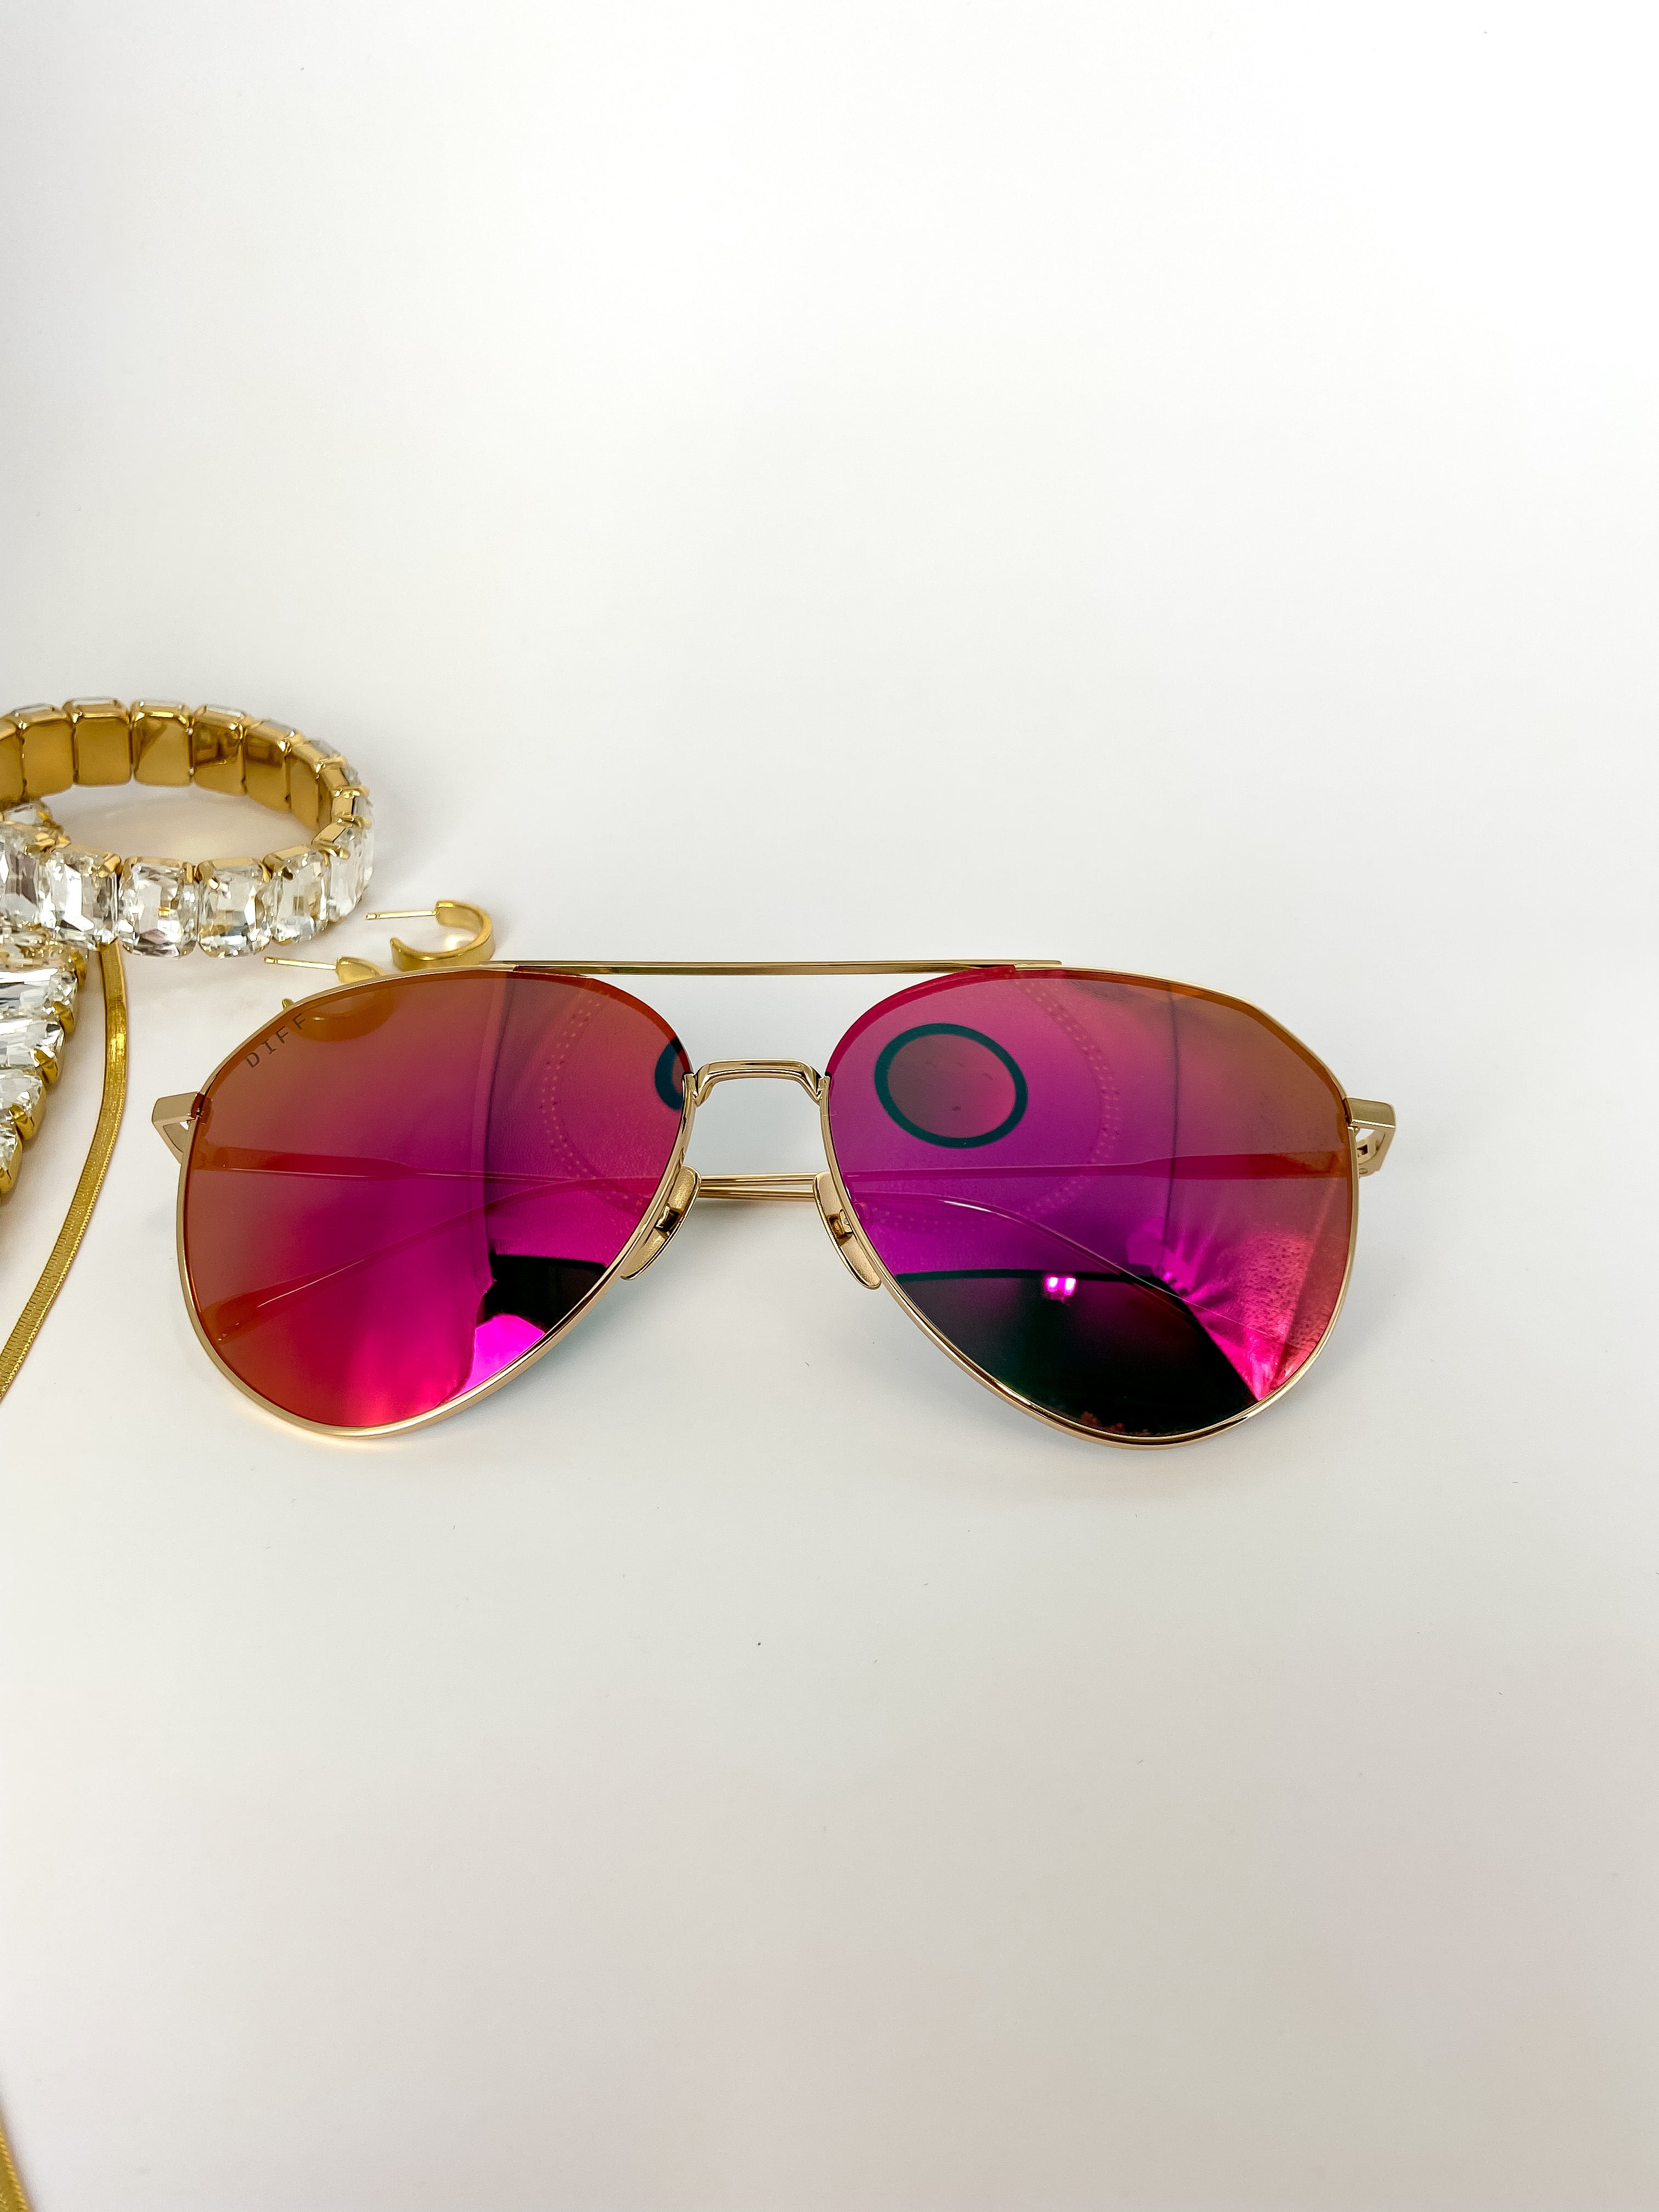 DIFF | Dash Sunset Mirror Lens Sunglasses in Gold Tone - Giddy Up Glamour Boutique